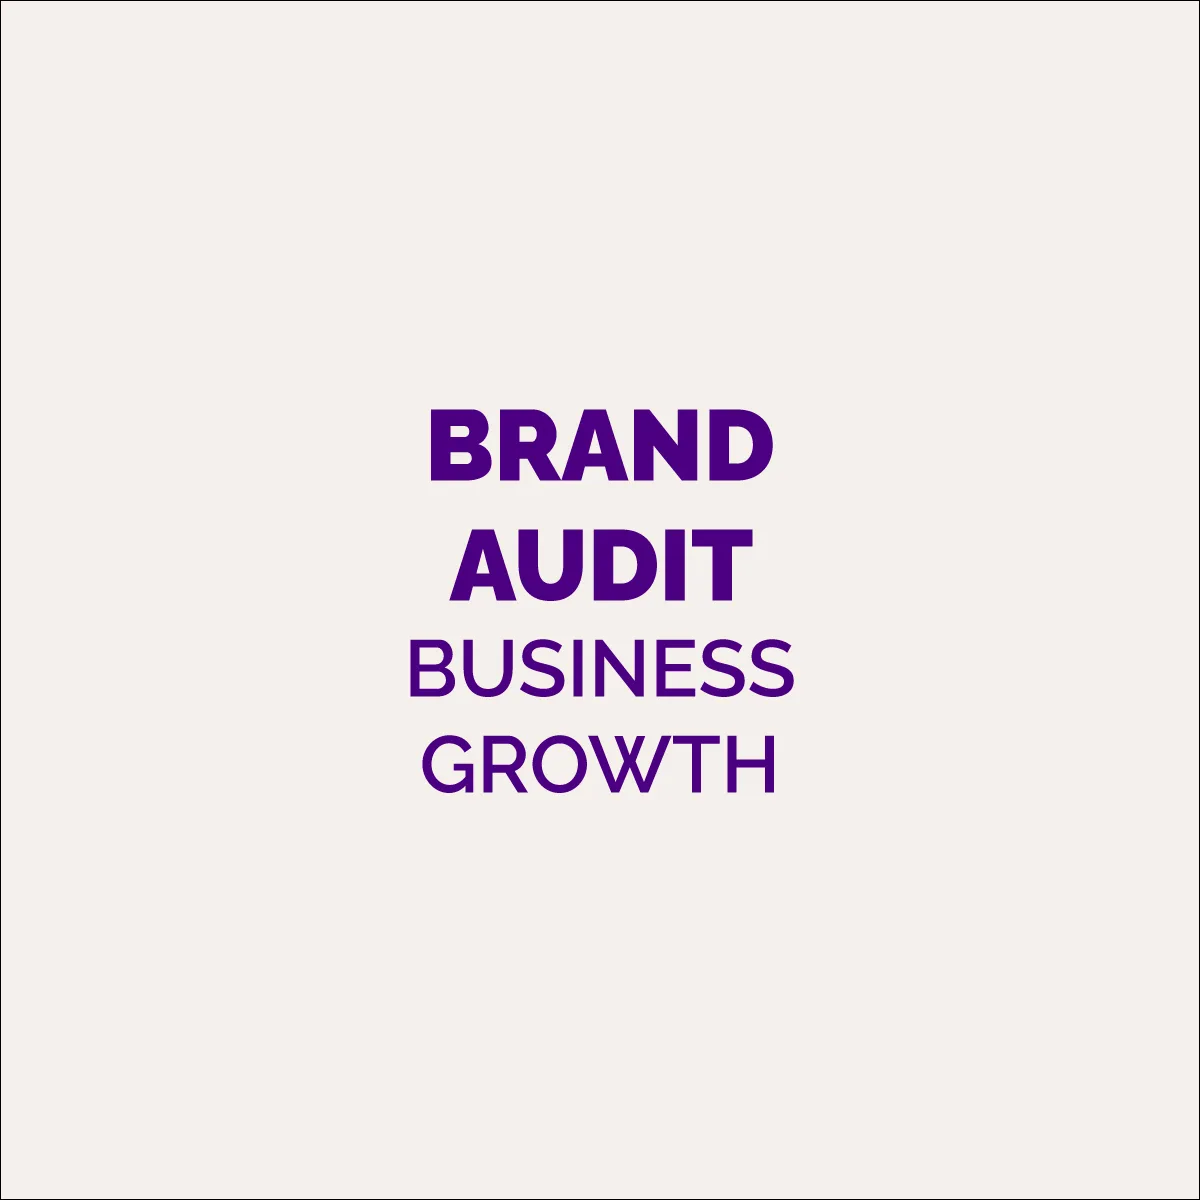 strategies for leveraging brand audit insights for business growth